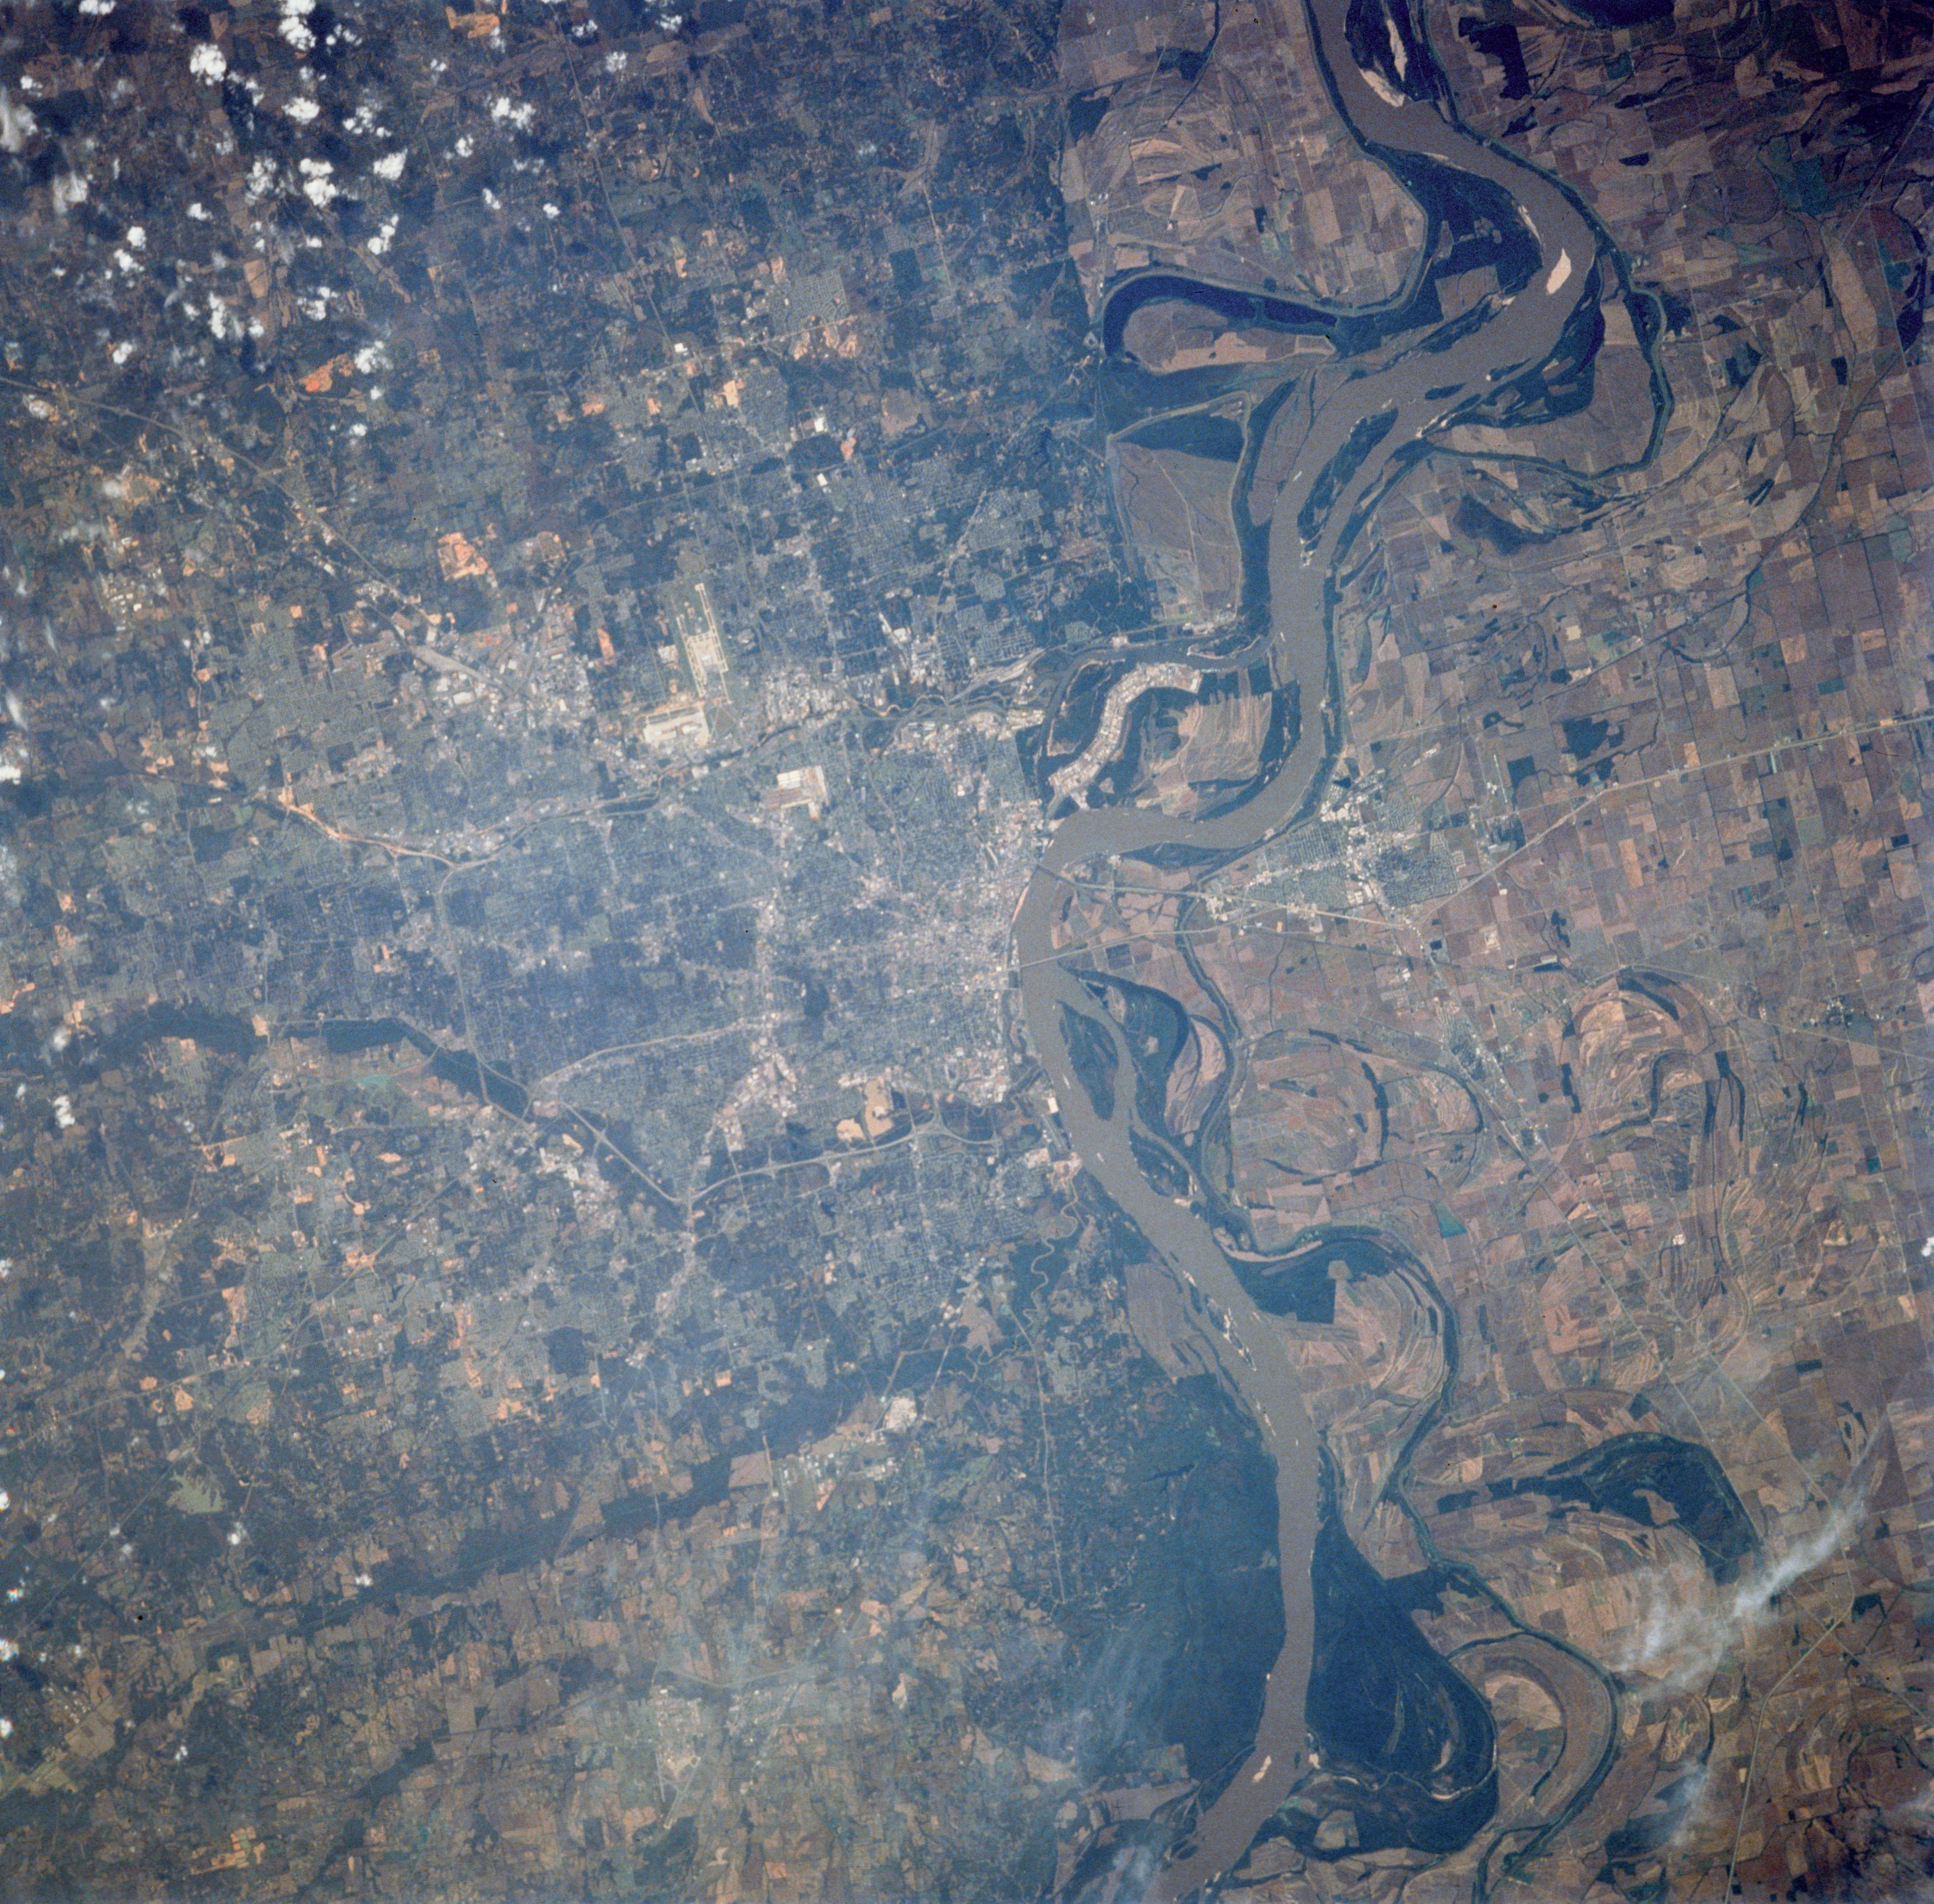 Earth observation photographs taken by the STS-58 crew. Memphis, Tennessee